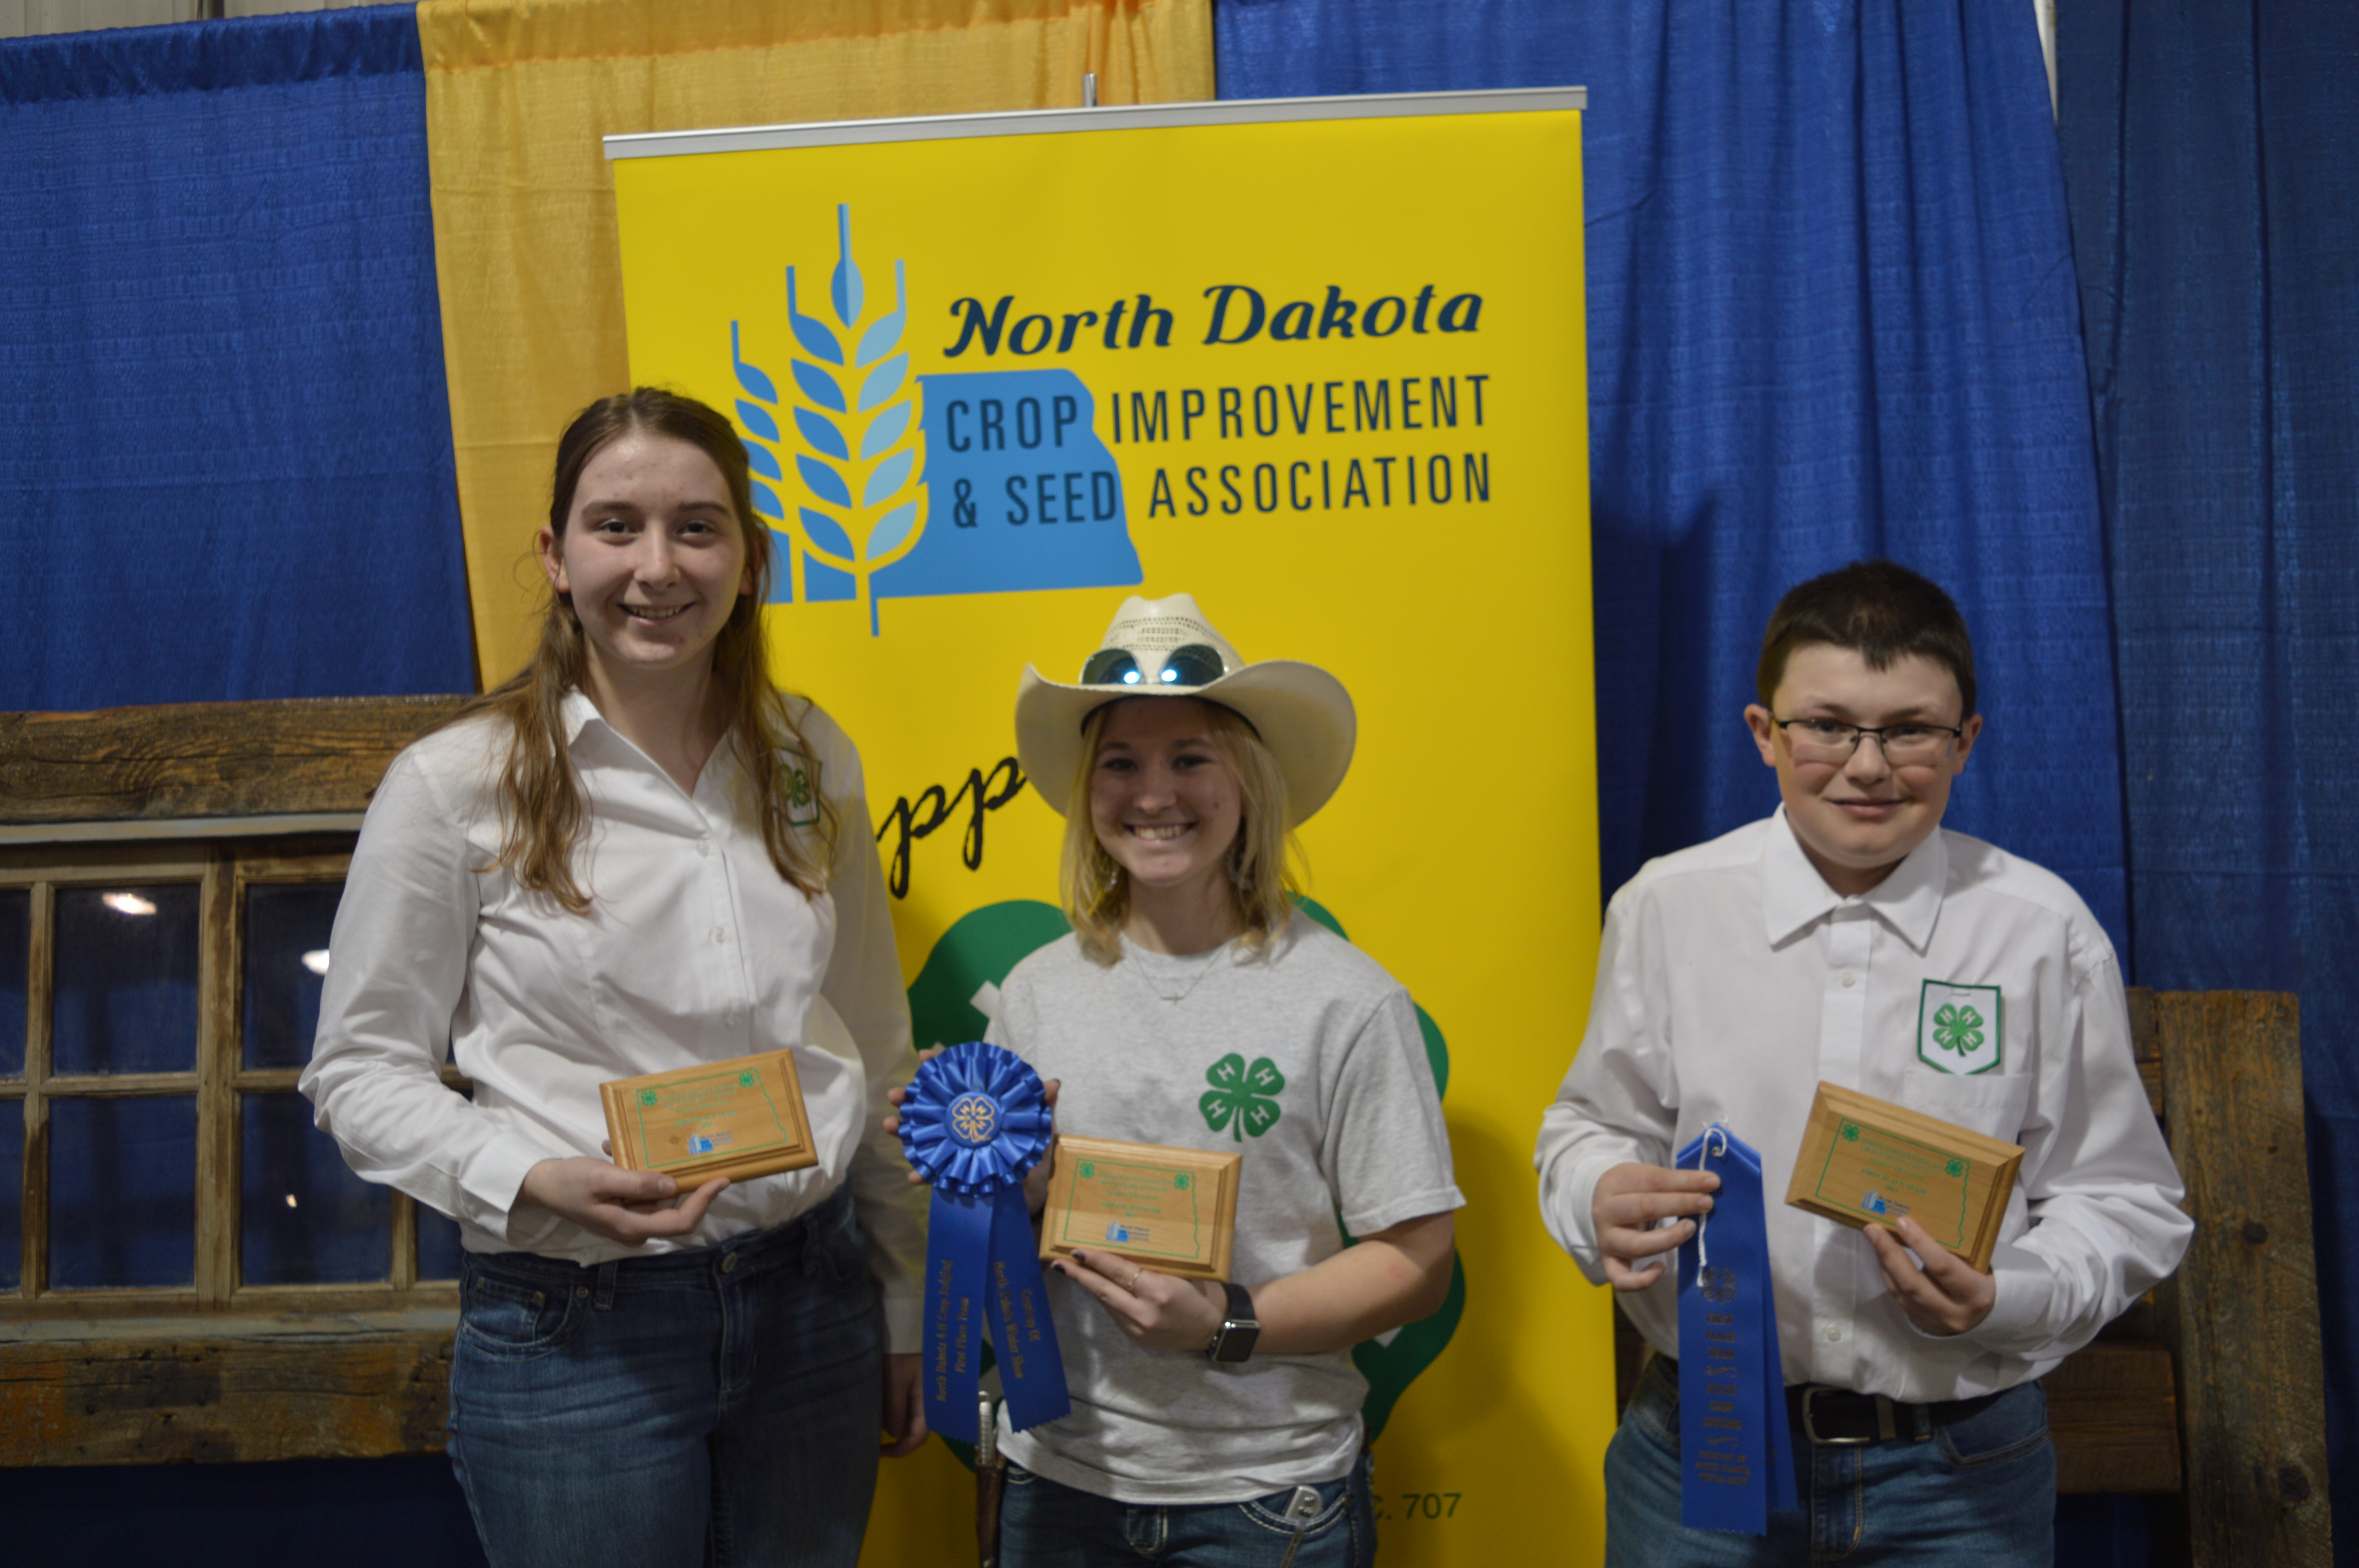 This team takes first place in the senior division of the North Dakota state 4-H crop judging contest in Valley City. Pictured are team members (from left) Laura Muggli, Olivia Throener and Wyatt Kessel. (NDSU photo)